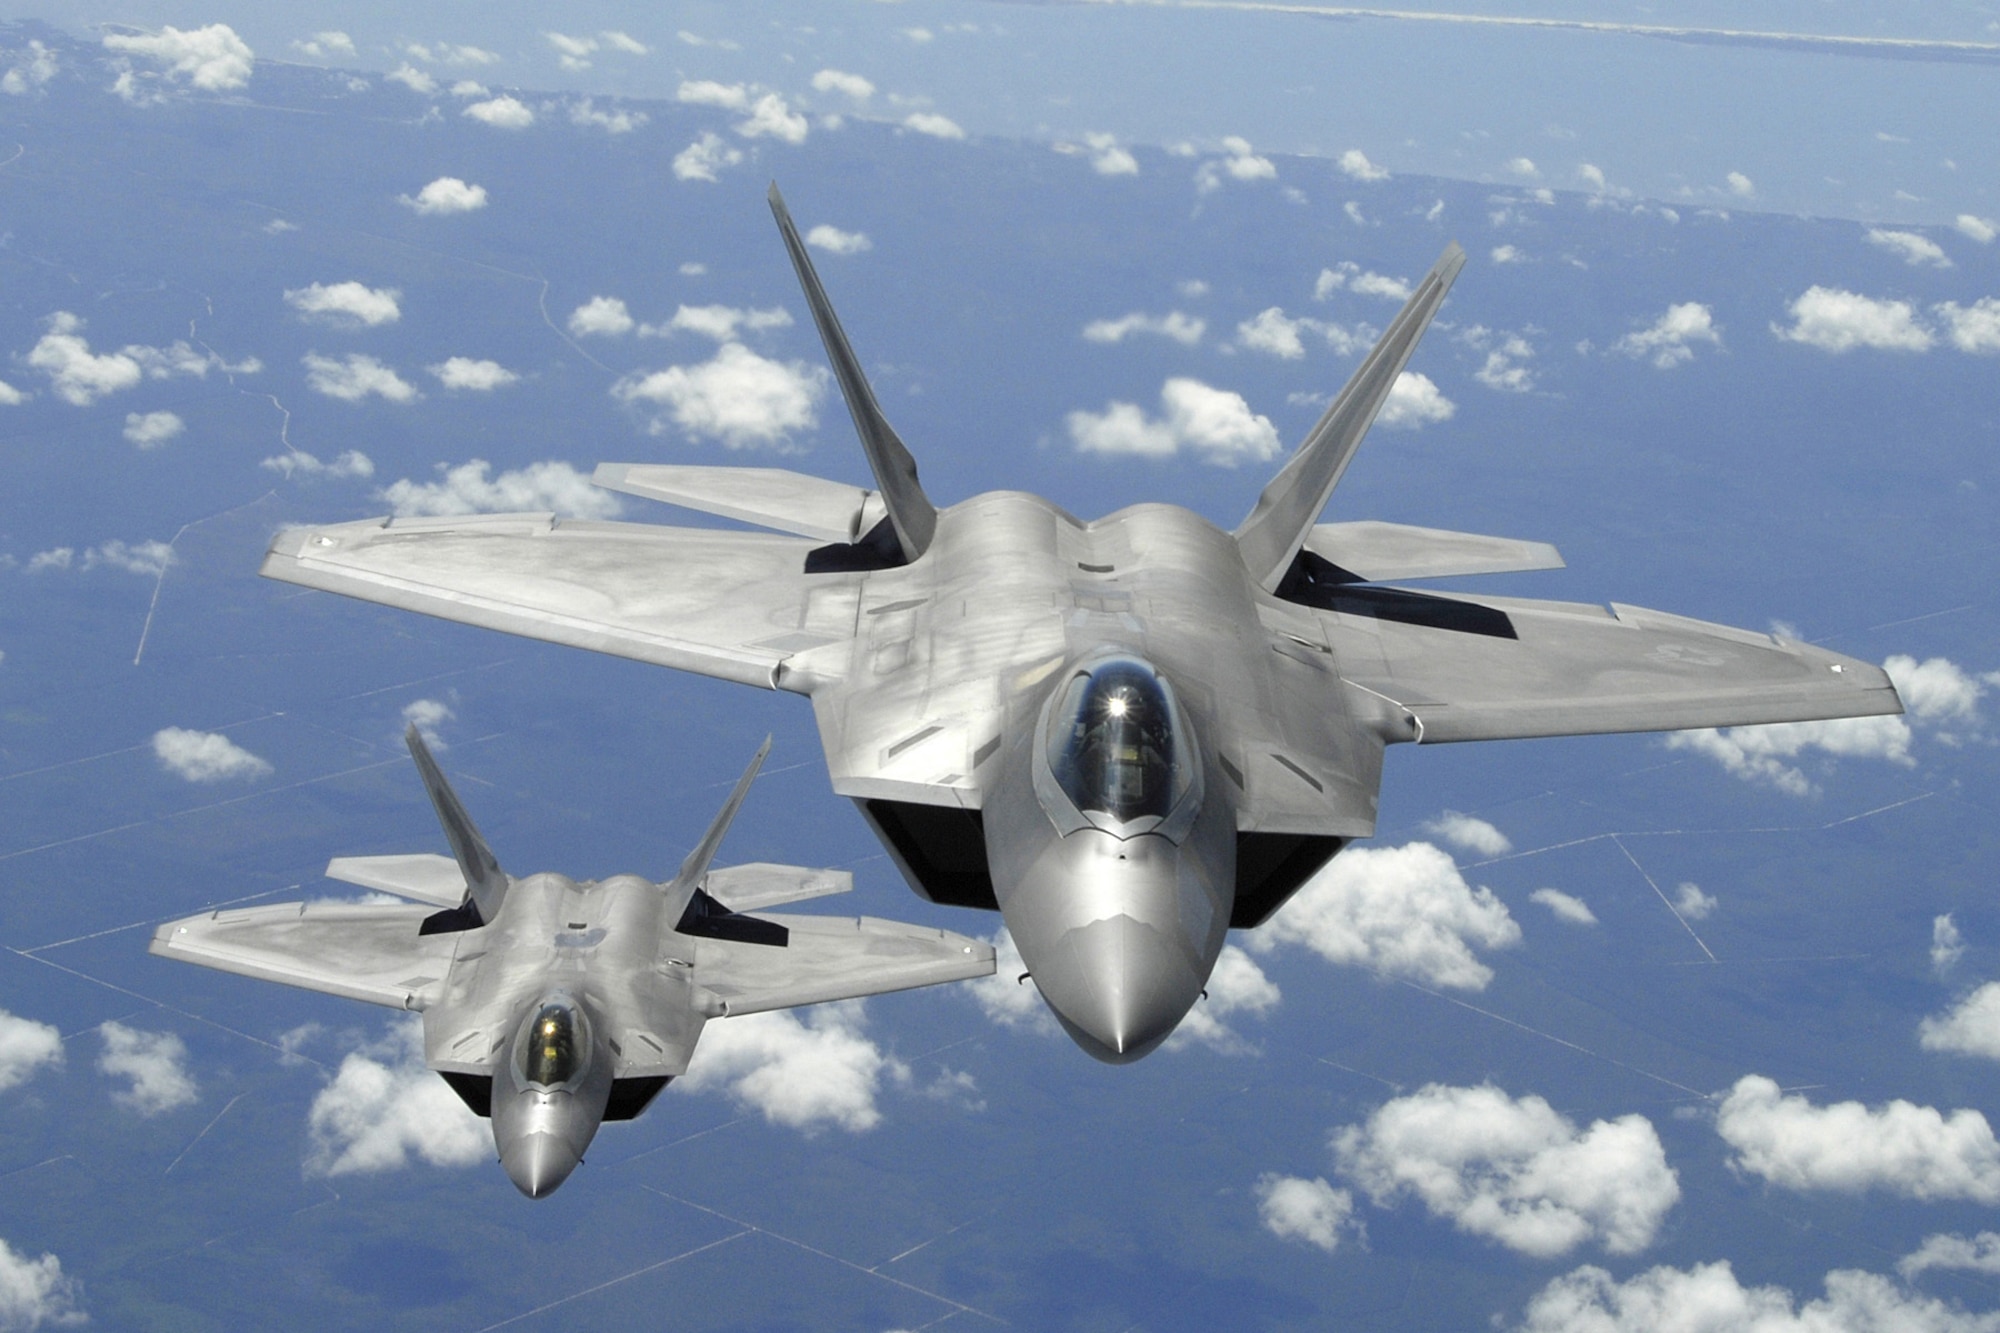 Two Air Force F-22 Raptor aircraft fly a training mission off the coast of Florida April 2, 2007. The Air Force's newest fighter aircraft, the F-22 Raptor, will demonstrate its combat capabilities at the 2008 "Wings Over Charleston" Air Expo. (Department of Defense photo/Senior Master Sgt. Thomas Meneguin)